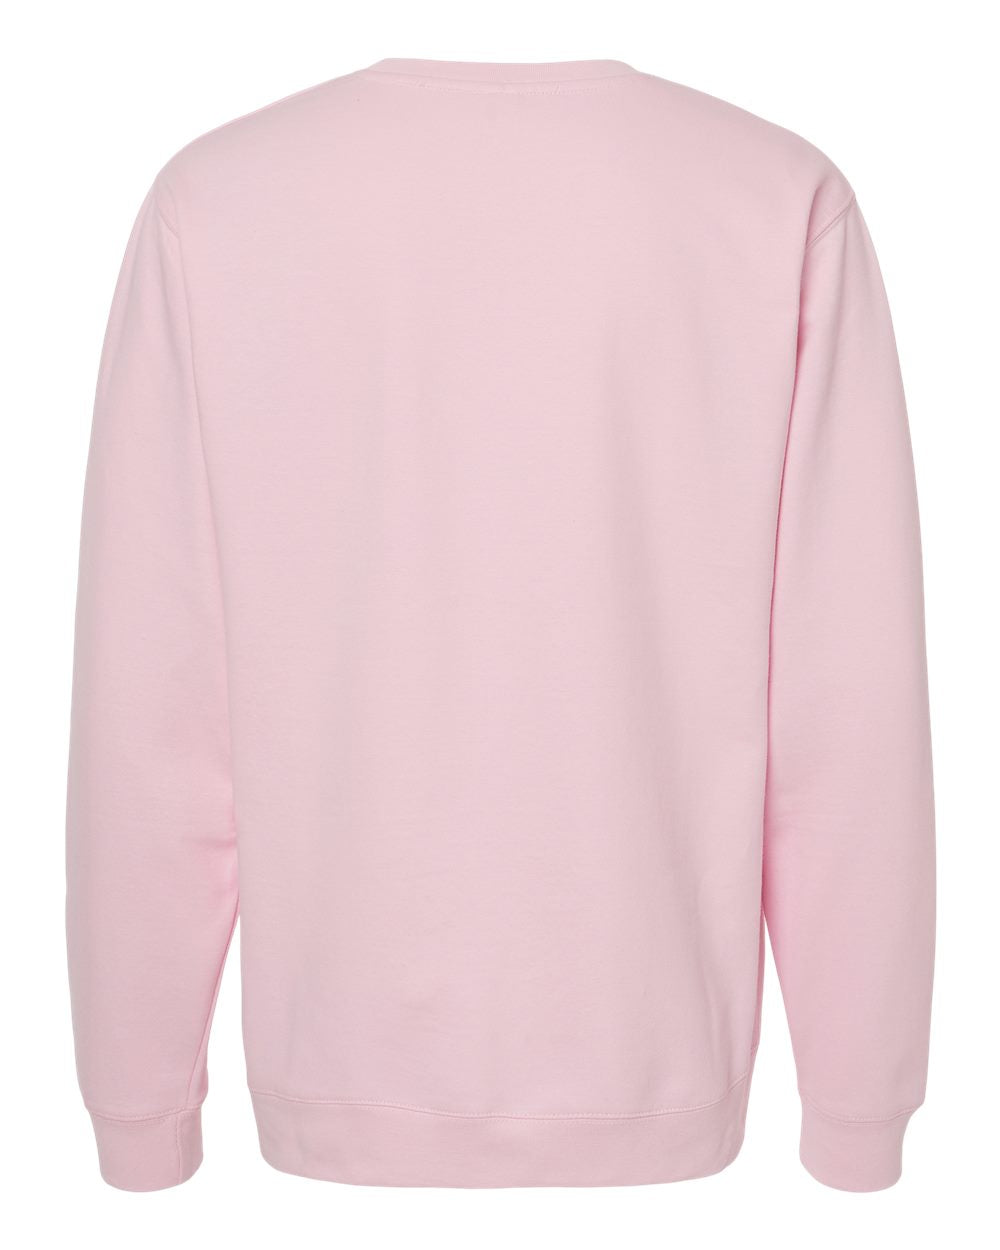 Independent Trading Co. Midweight Sweatshirt SS3000 #color_Light Pink